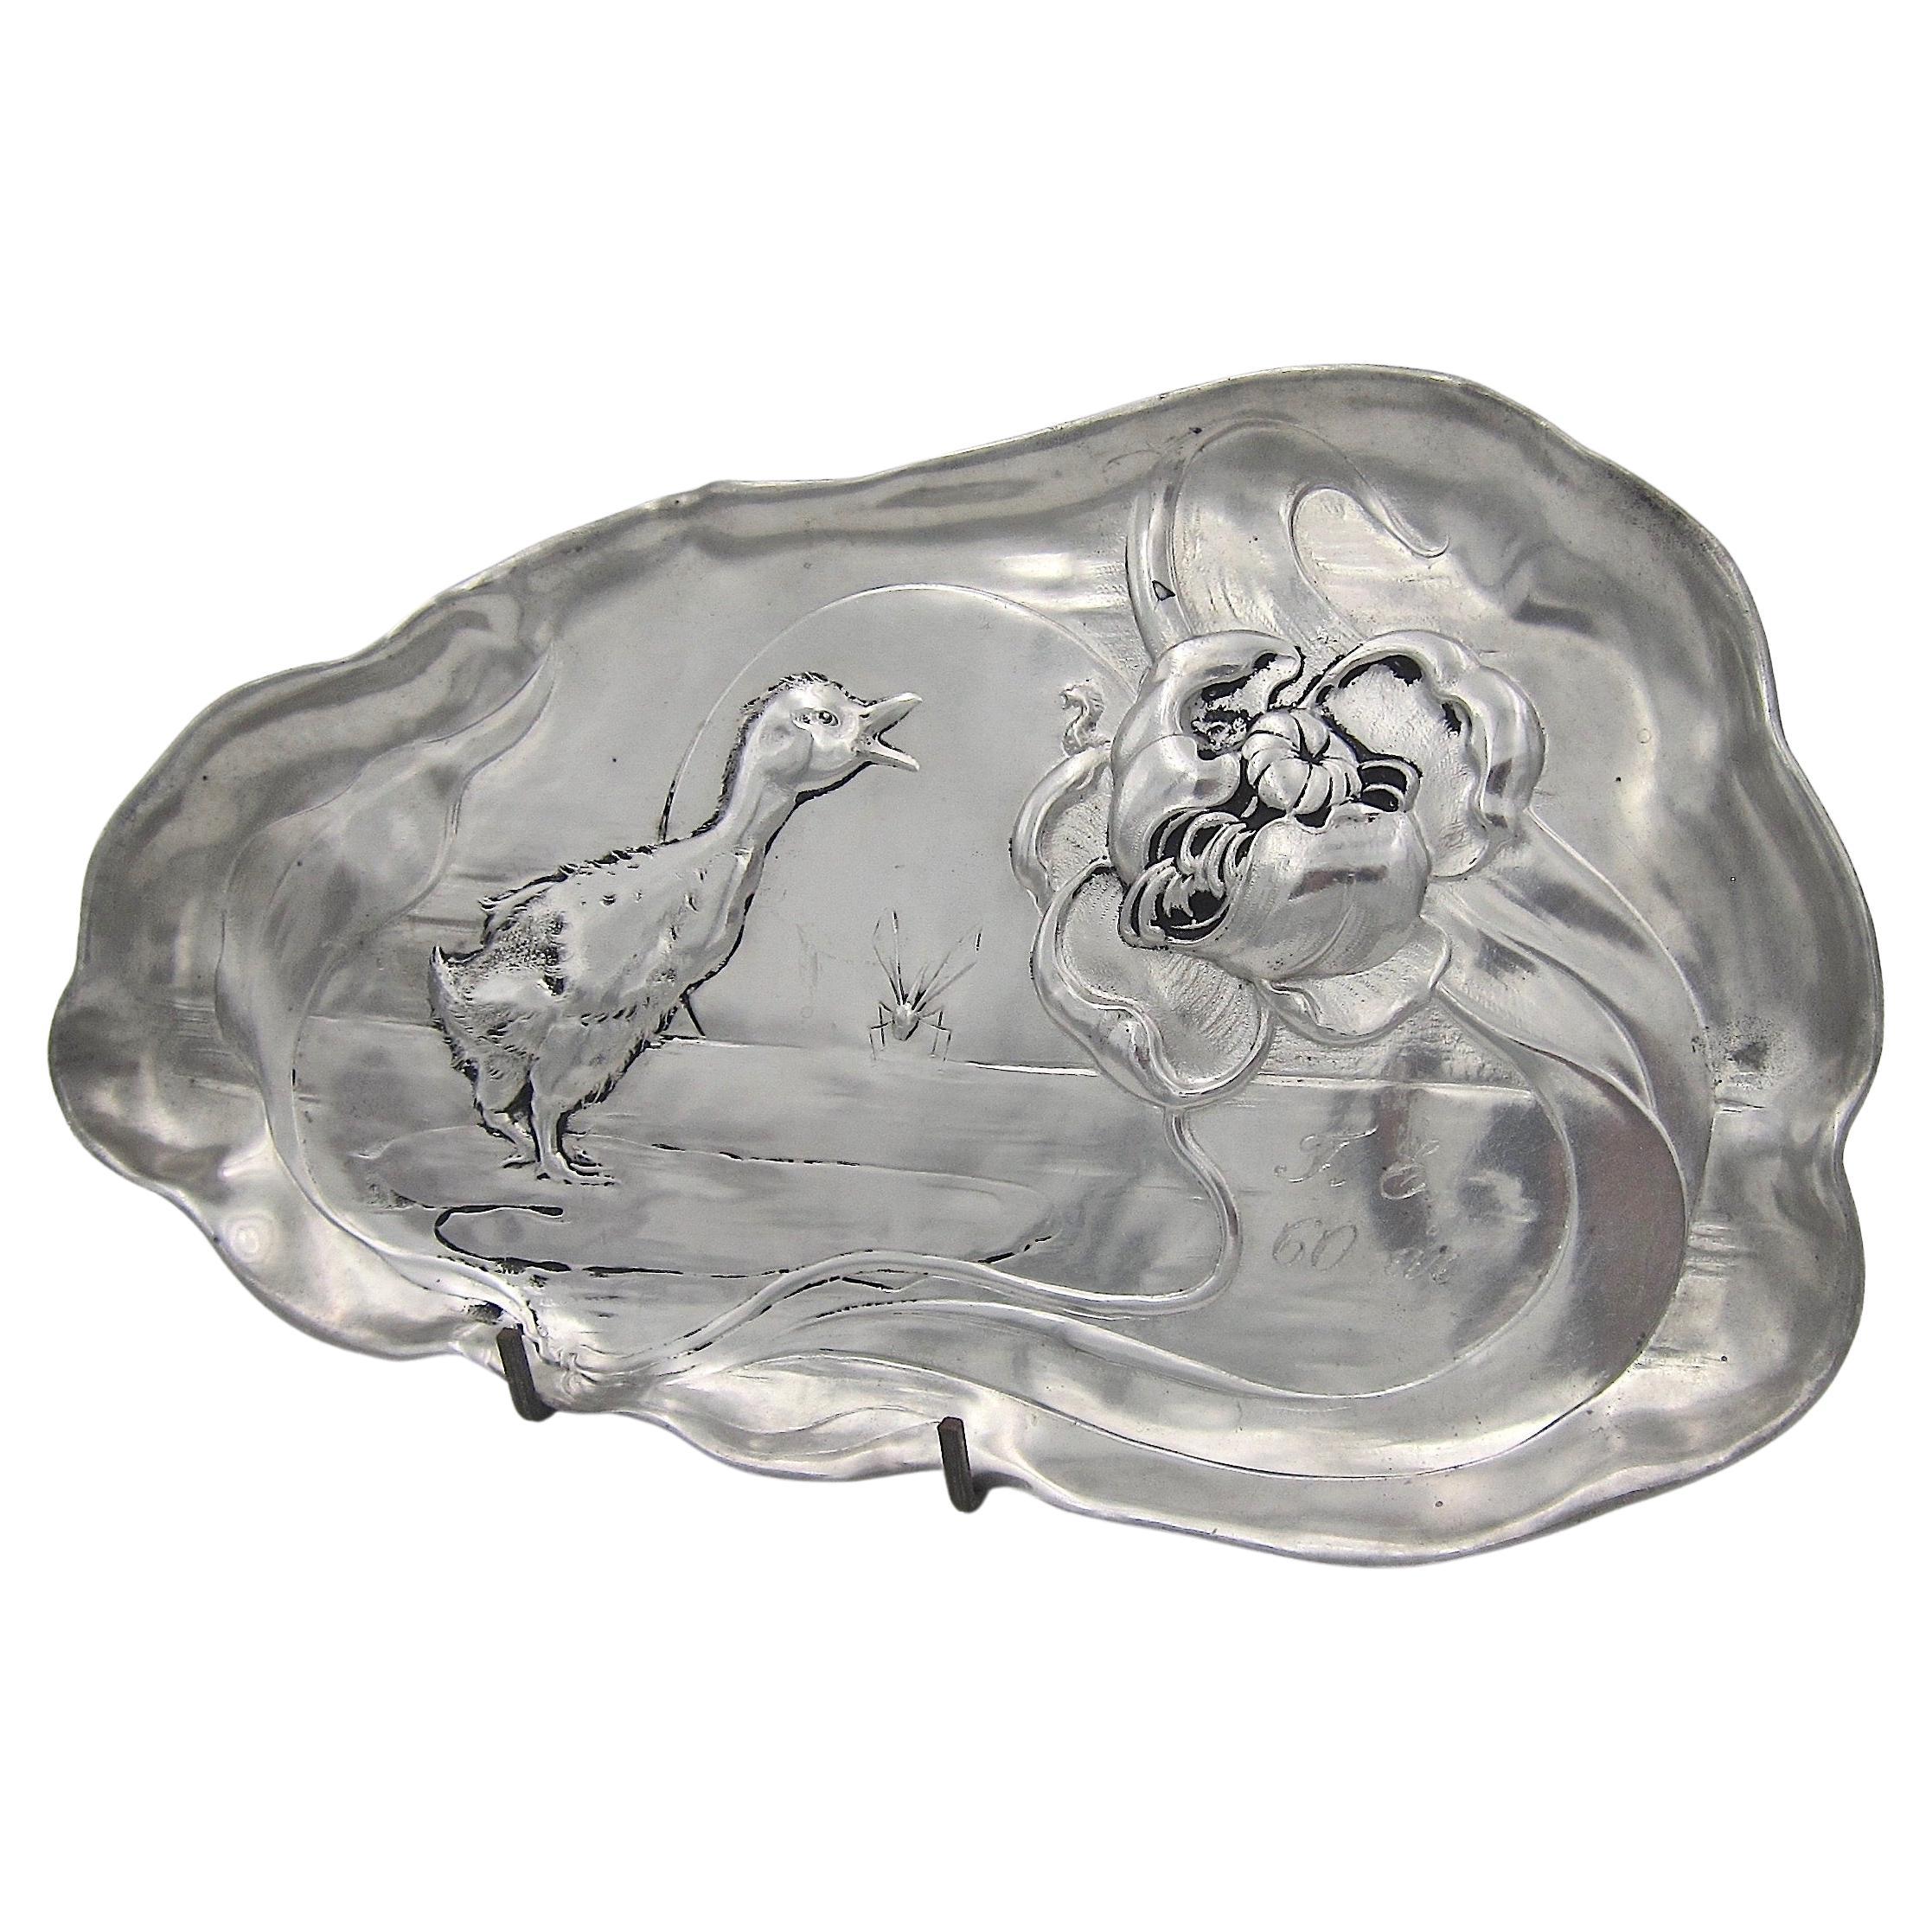 Antique Kayserzinn Vide Poche Tray with Duckling For Sale